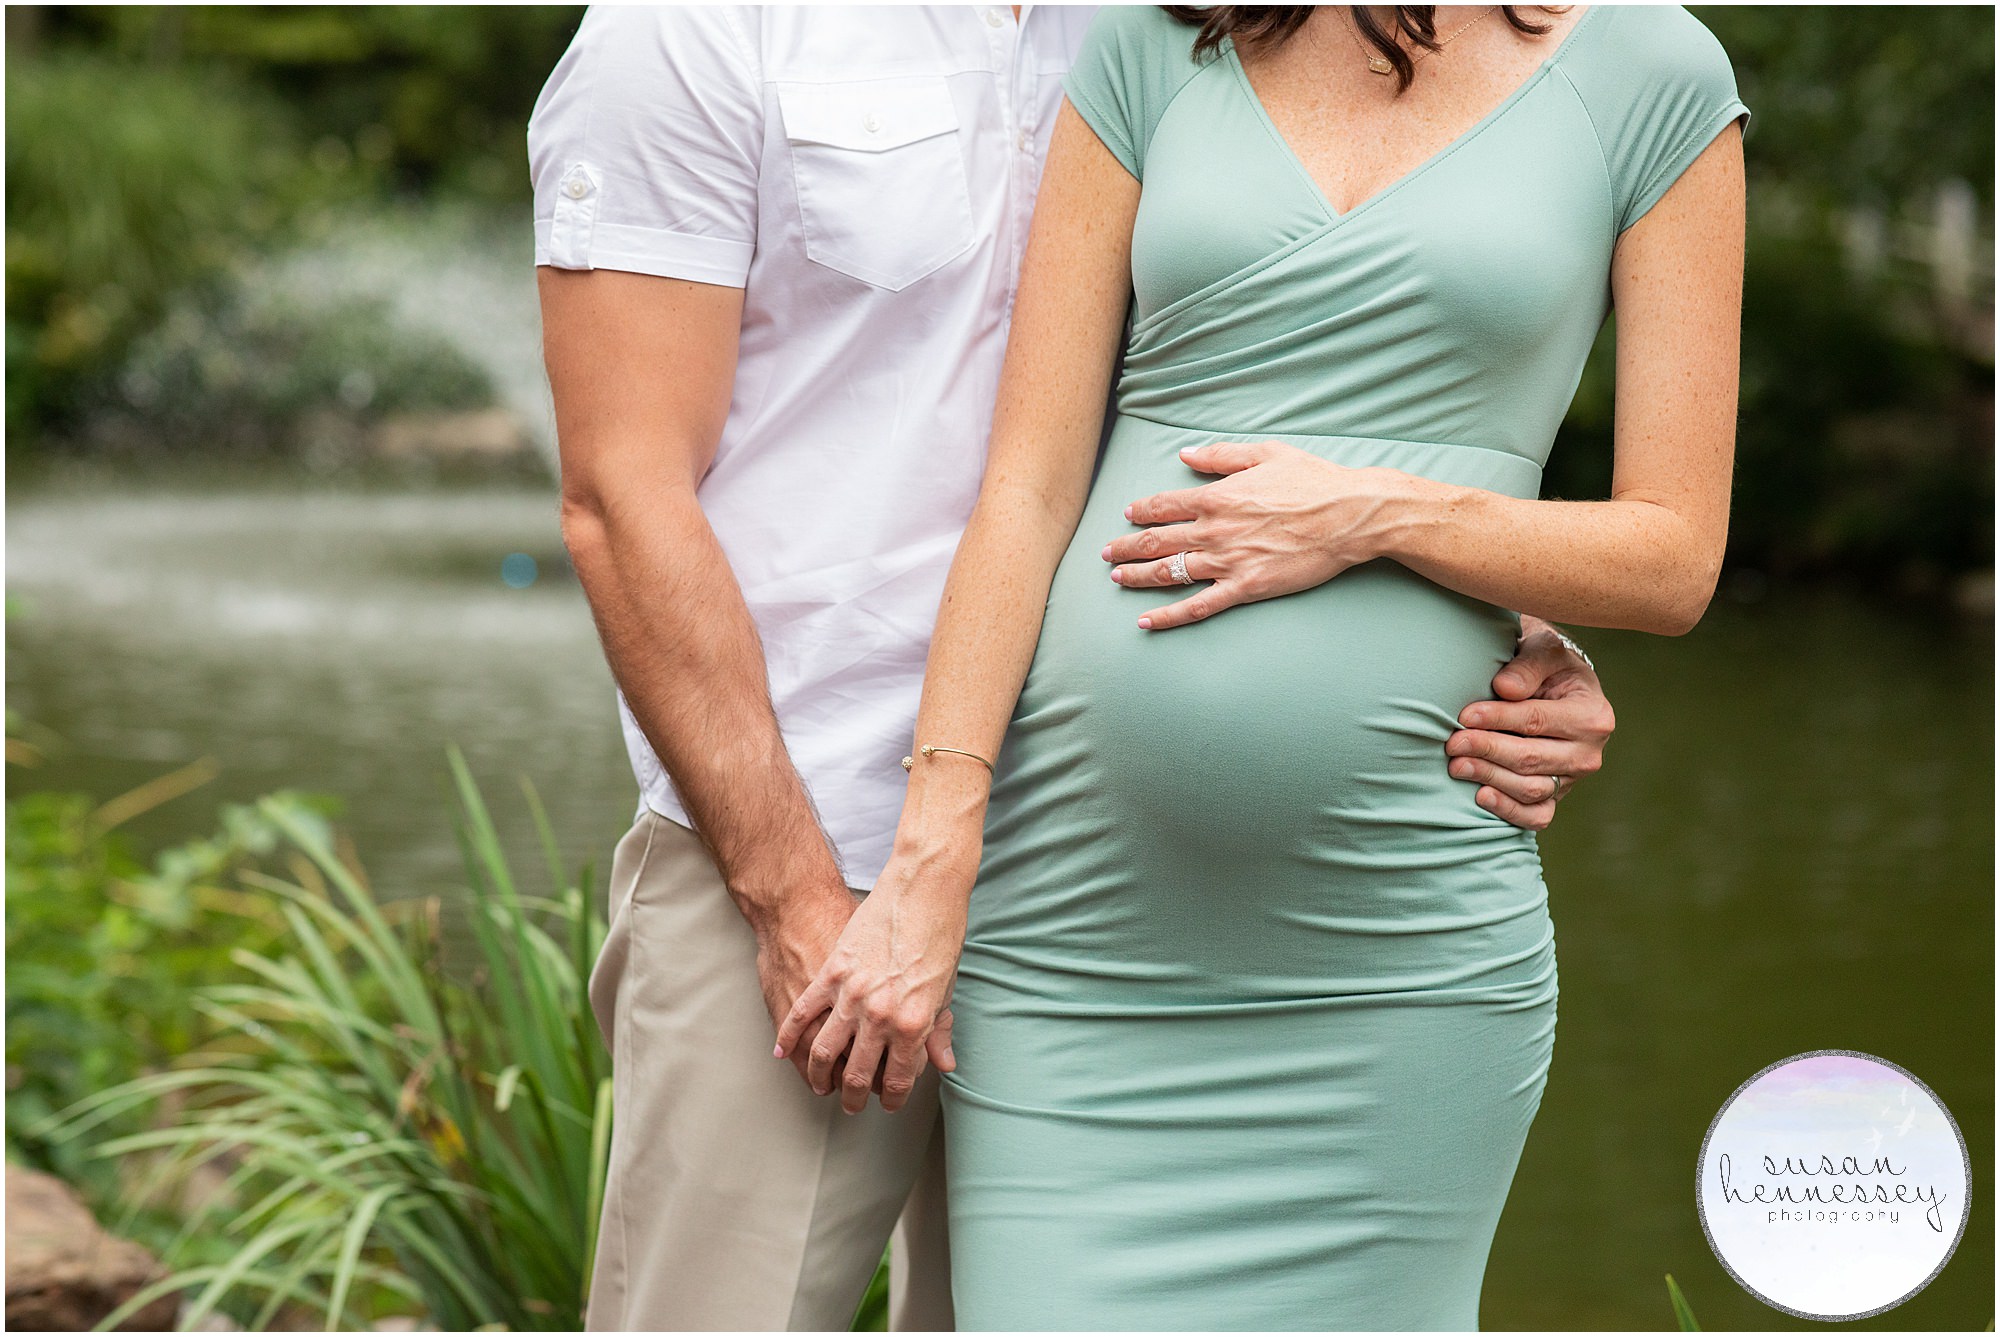 Sayen Gardens maternity session in Central Jersey